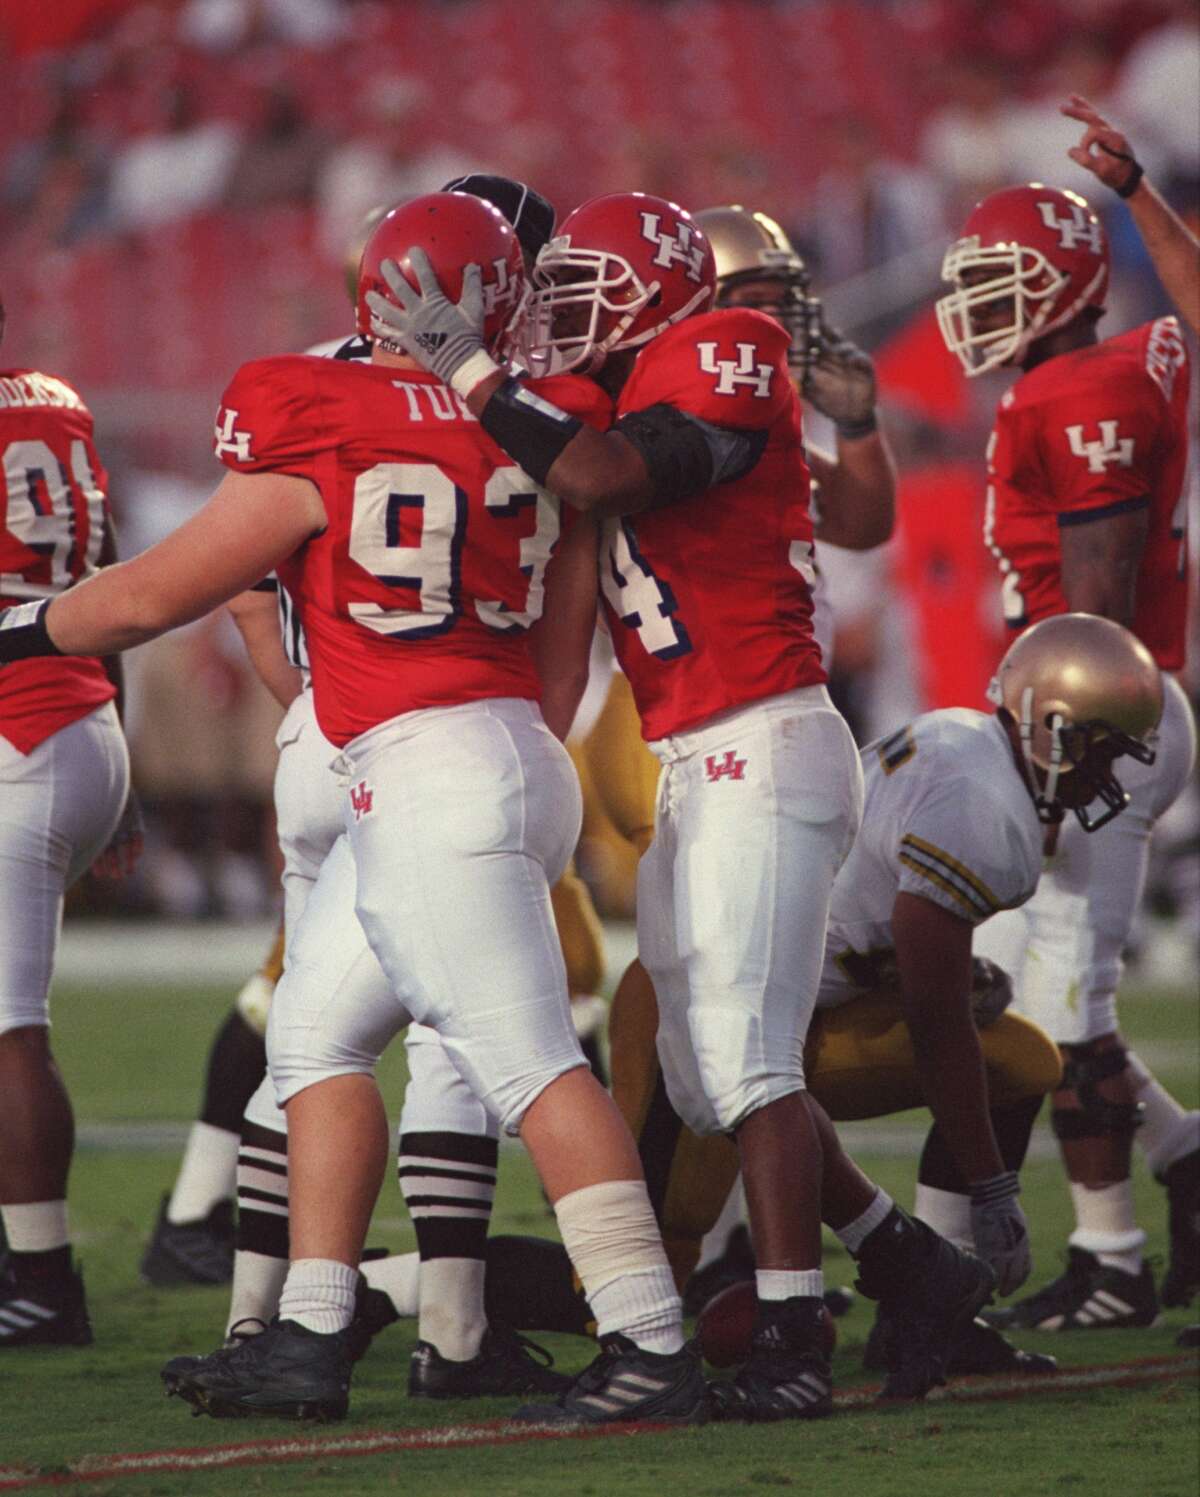 Houston defensive lineman Josh Tubbs, left, is congratulated by teammate Sam Hairston after Tubbs dropped Army running back Michael Wallace for a loss in the first half of UH's stirring come-from-behind win in September 2000. (Houston Chronicle file photo)